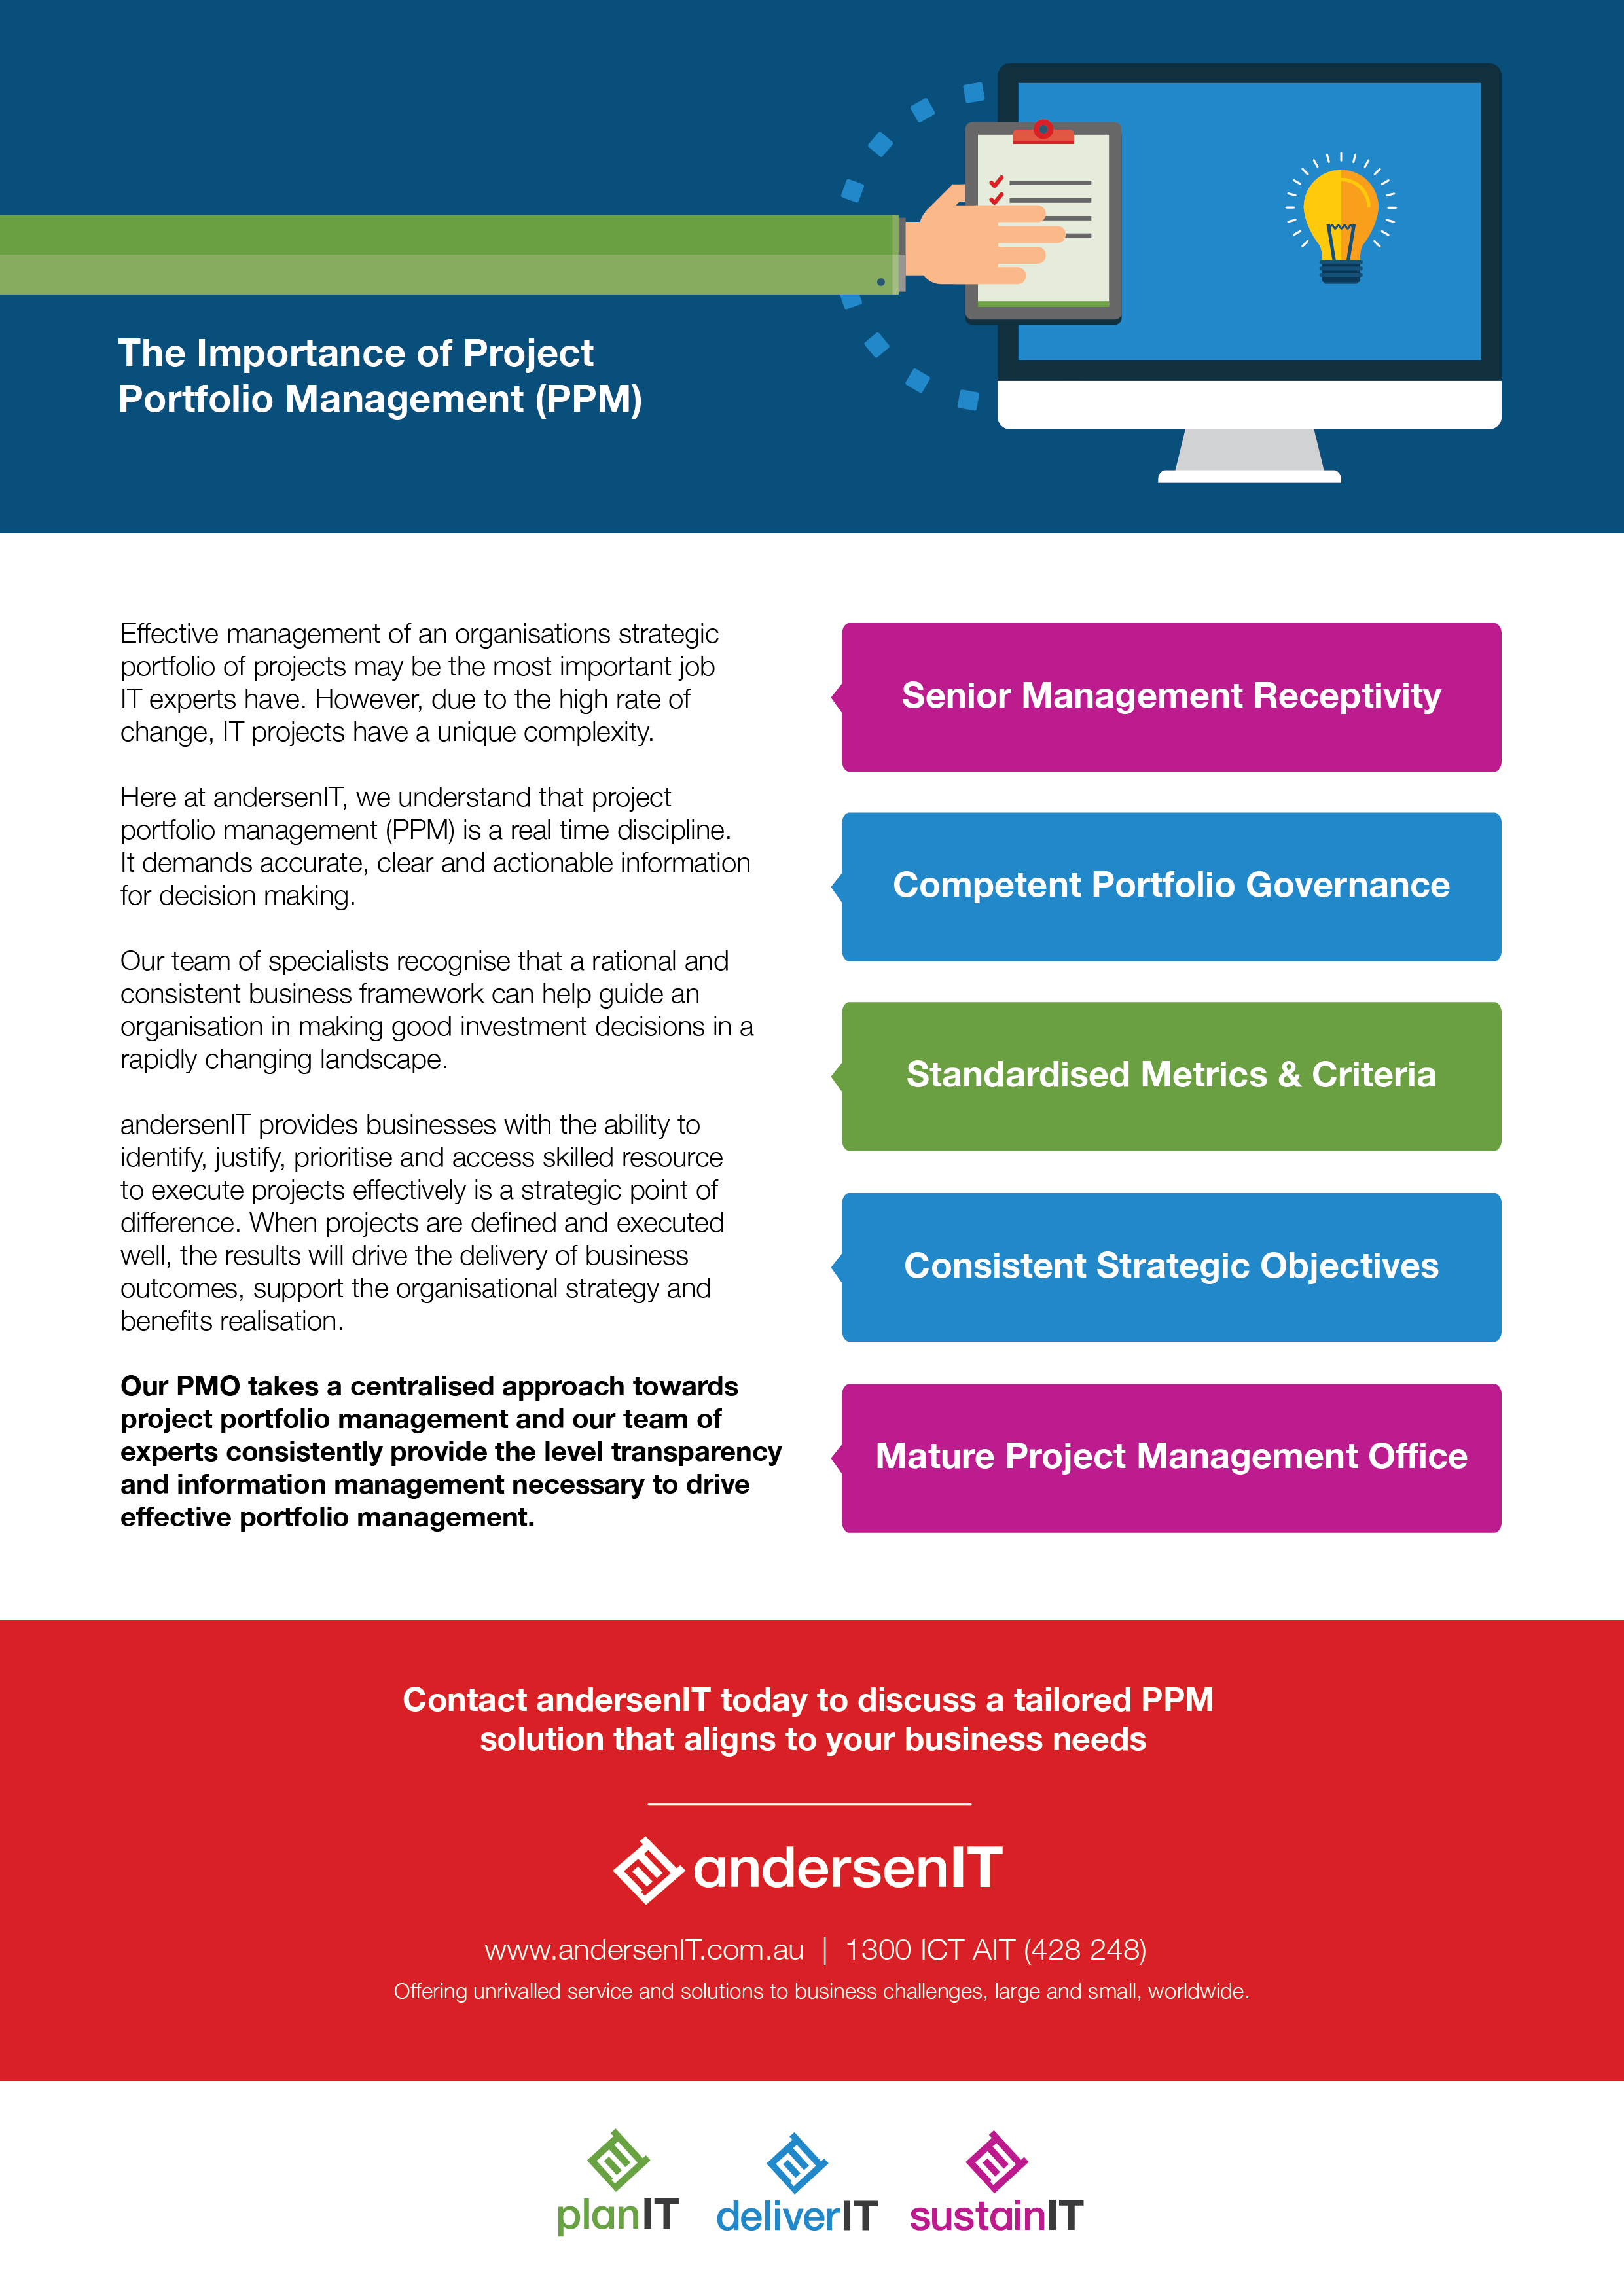 The Importance of Project Portfolio Management (PPM) – Infographic